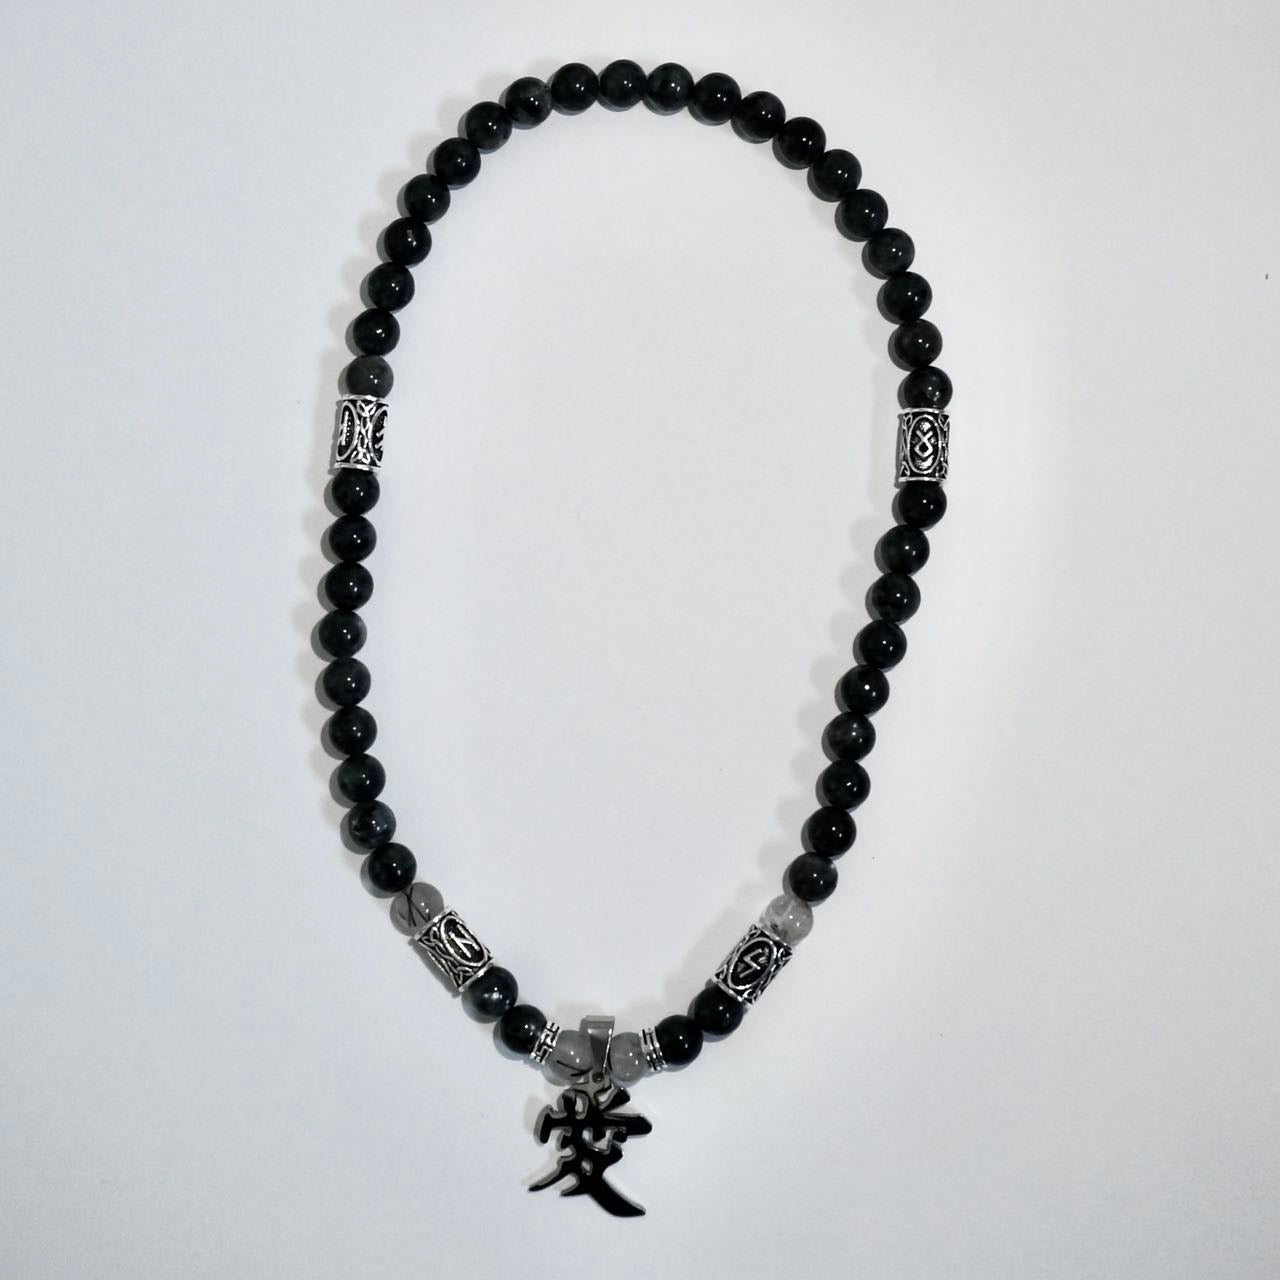 Eternal Love - Black Crystal Necklace with Silver Chinese character charm (Unisex)